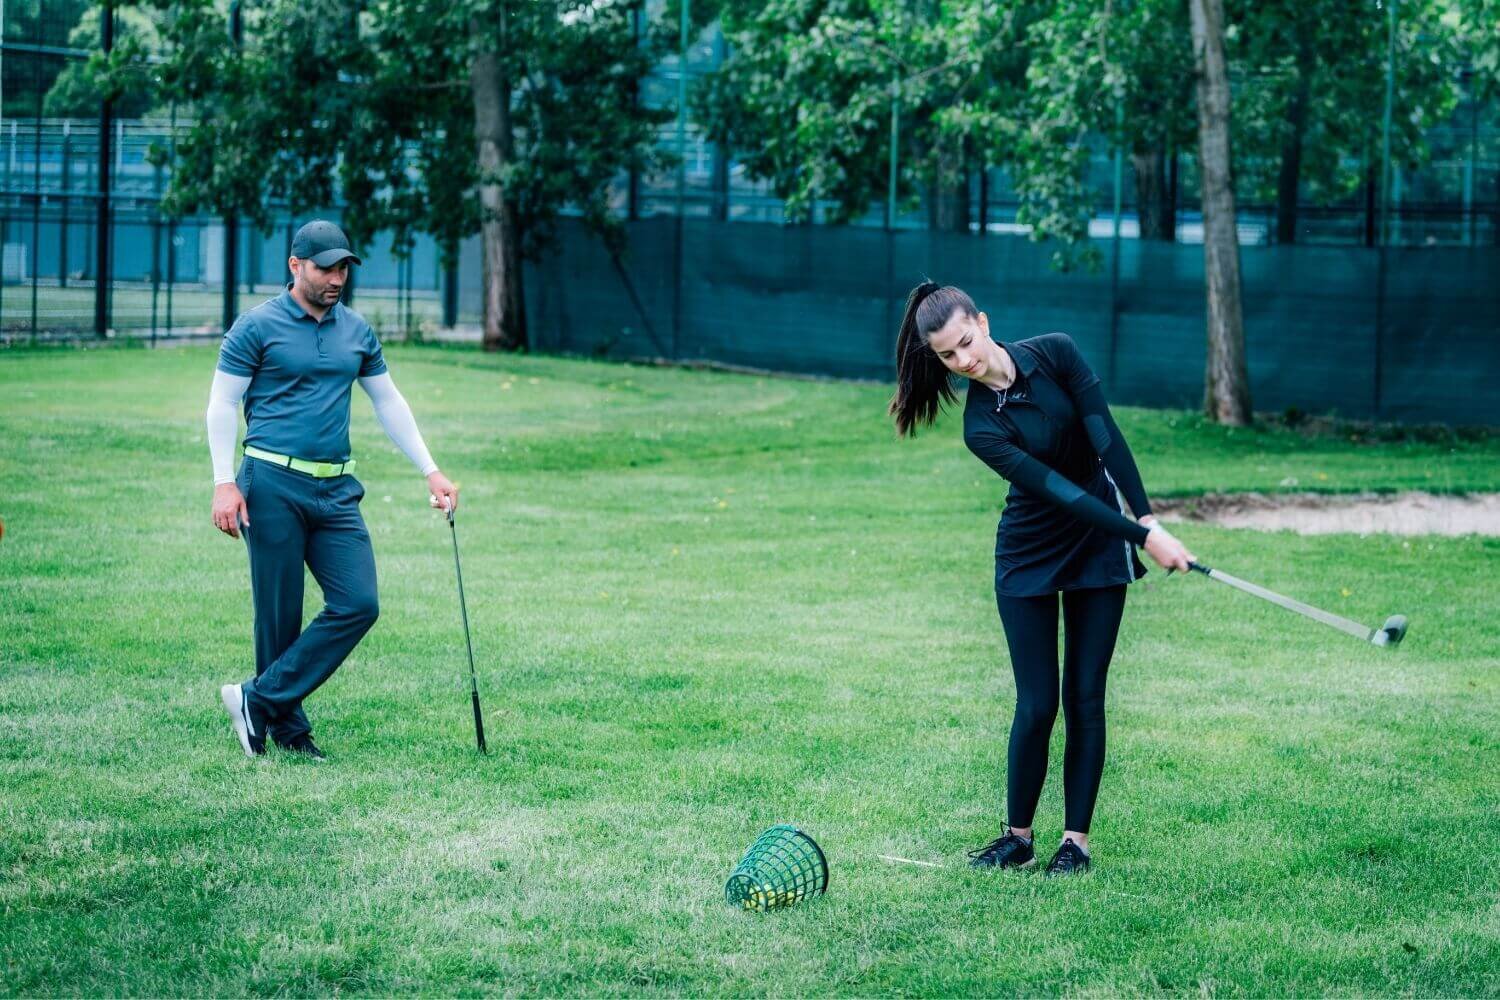 Woman practicing golf with a male golf instructor